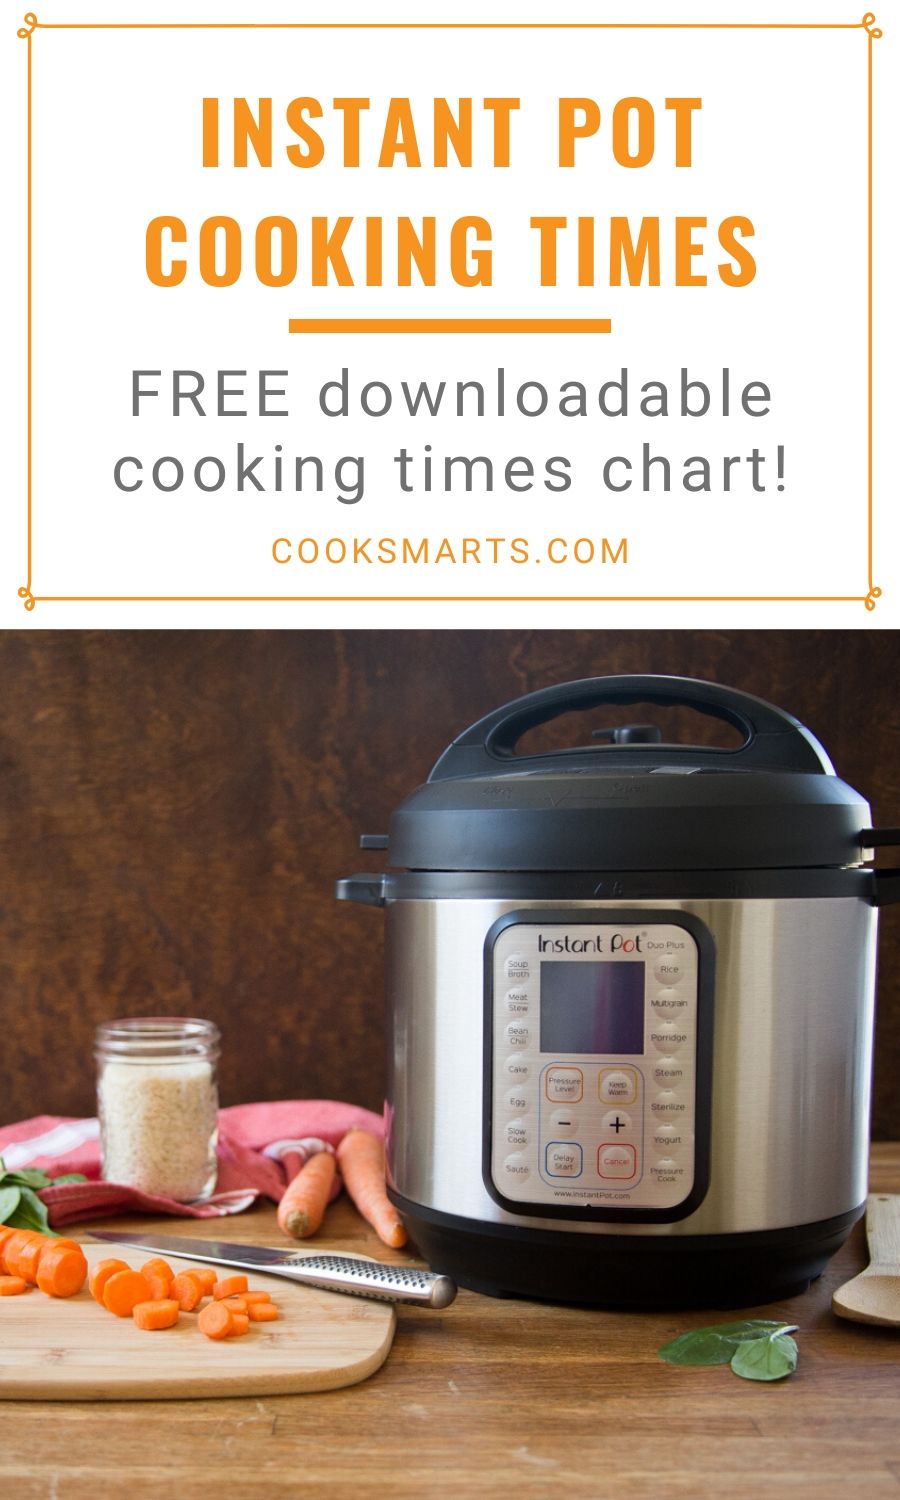 Instant Pot Cooking Times Cheat Sheet | Cook Smarts